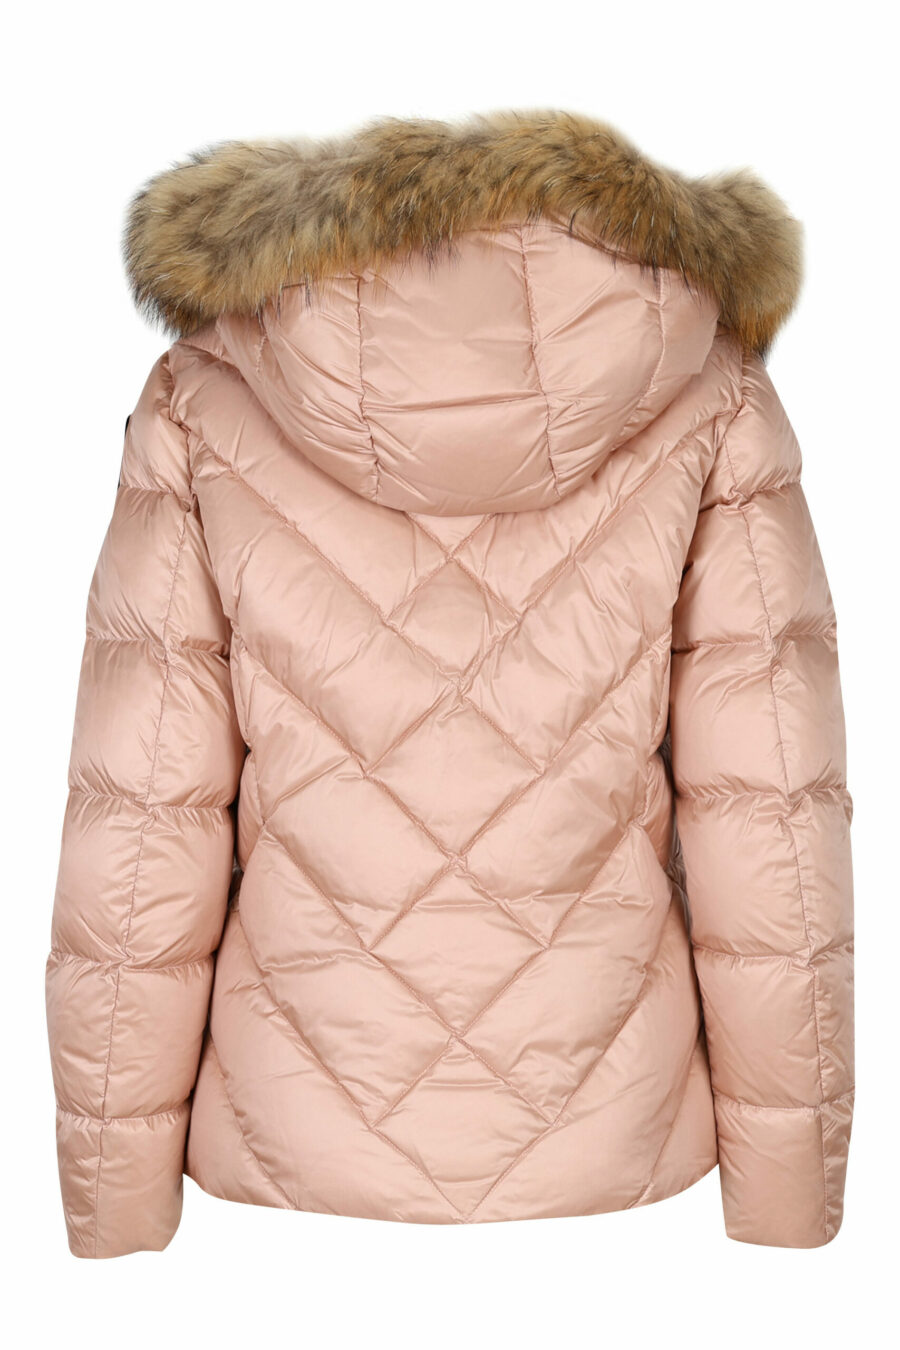 Pale pink hooded jacket with fur hood and diagonal lines and violet lining - 8058610691691 2 scaled